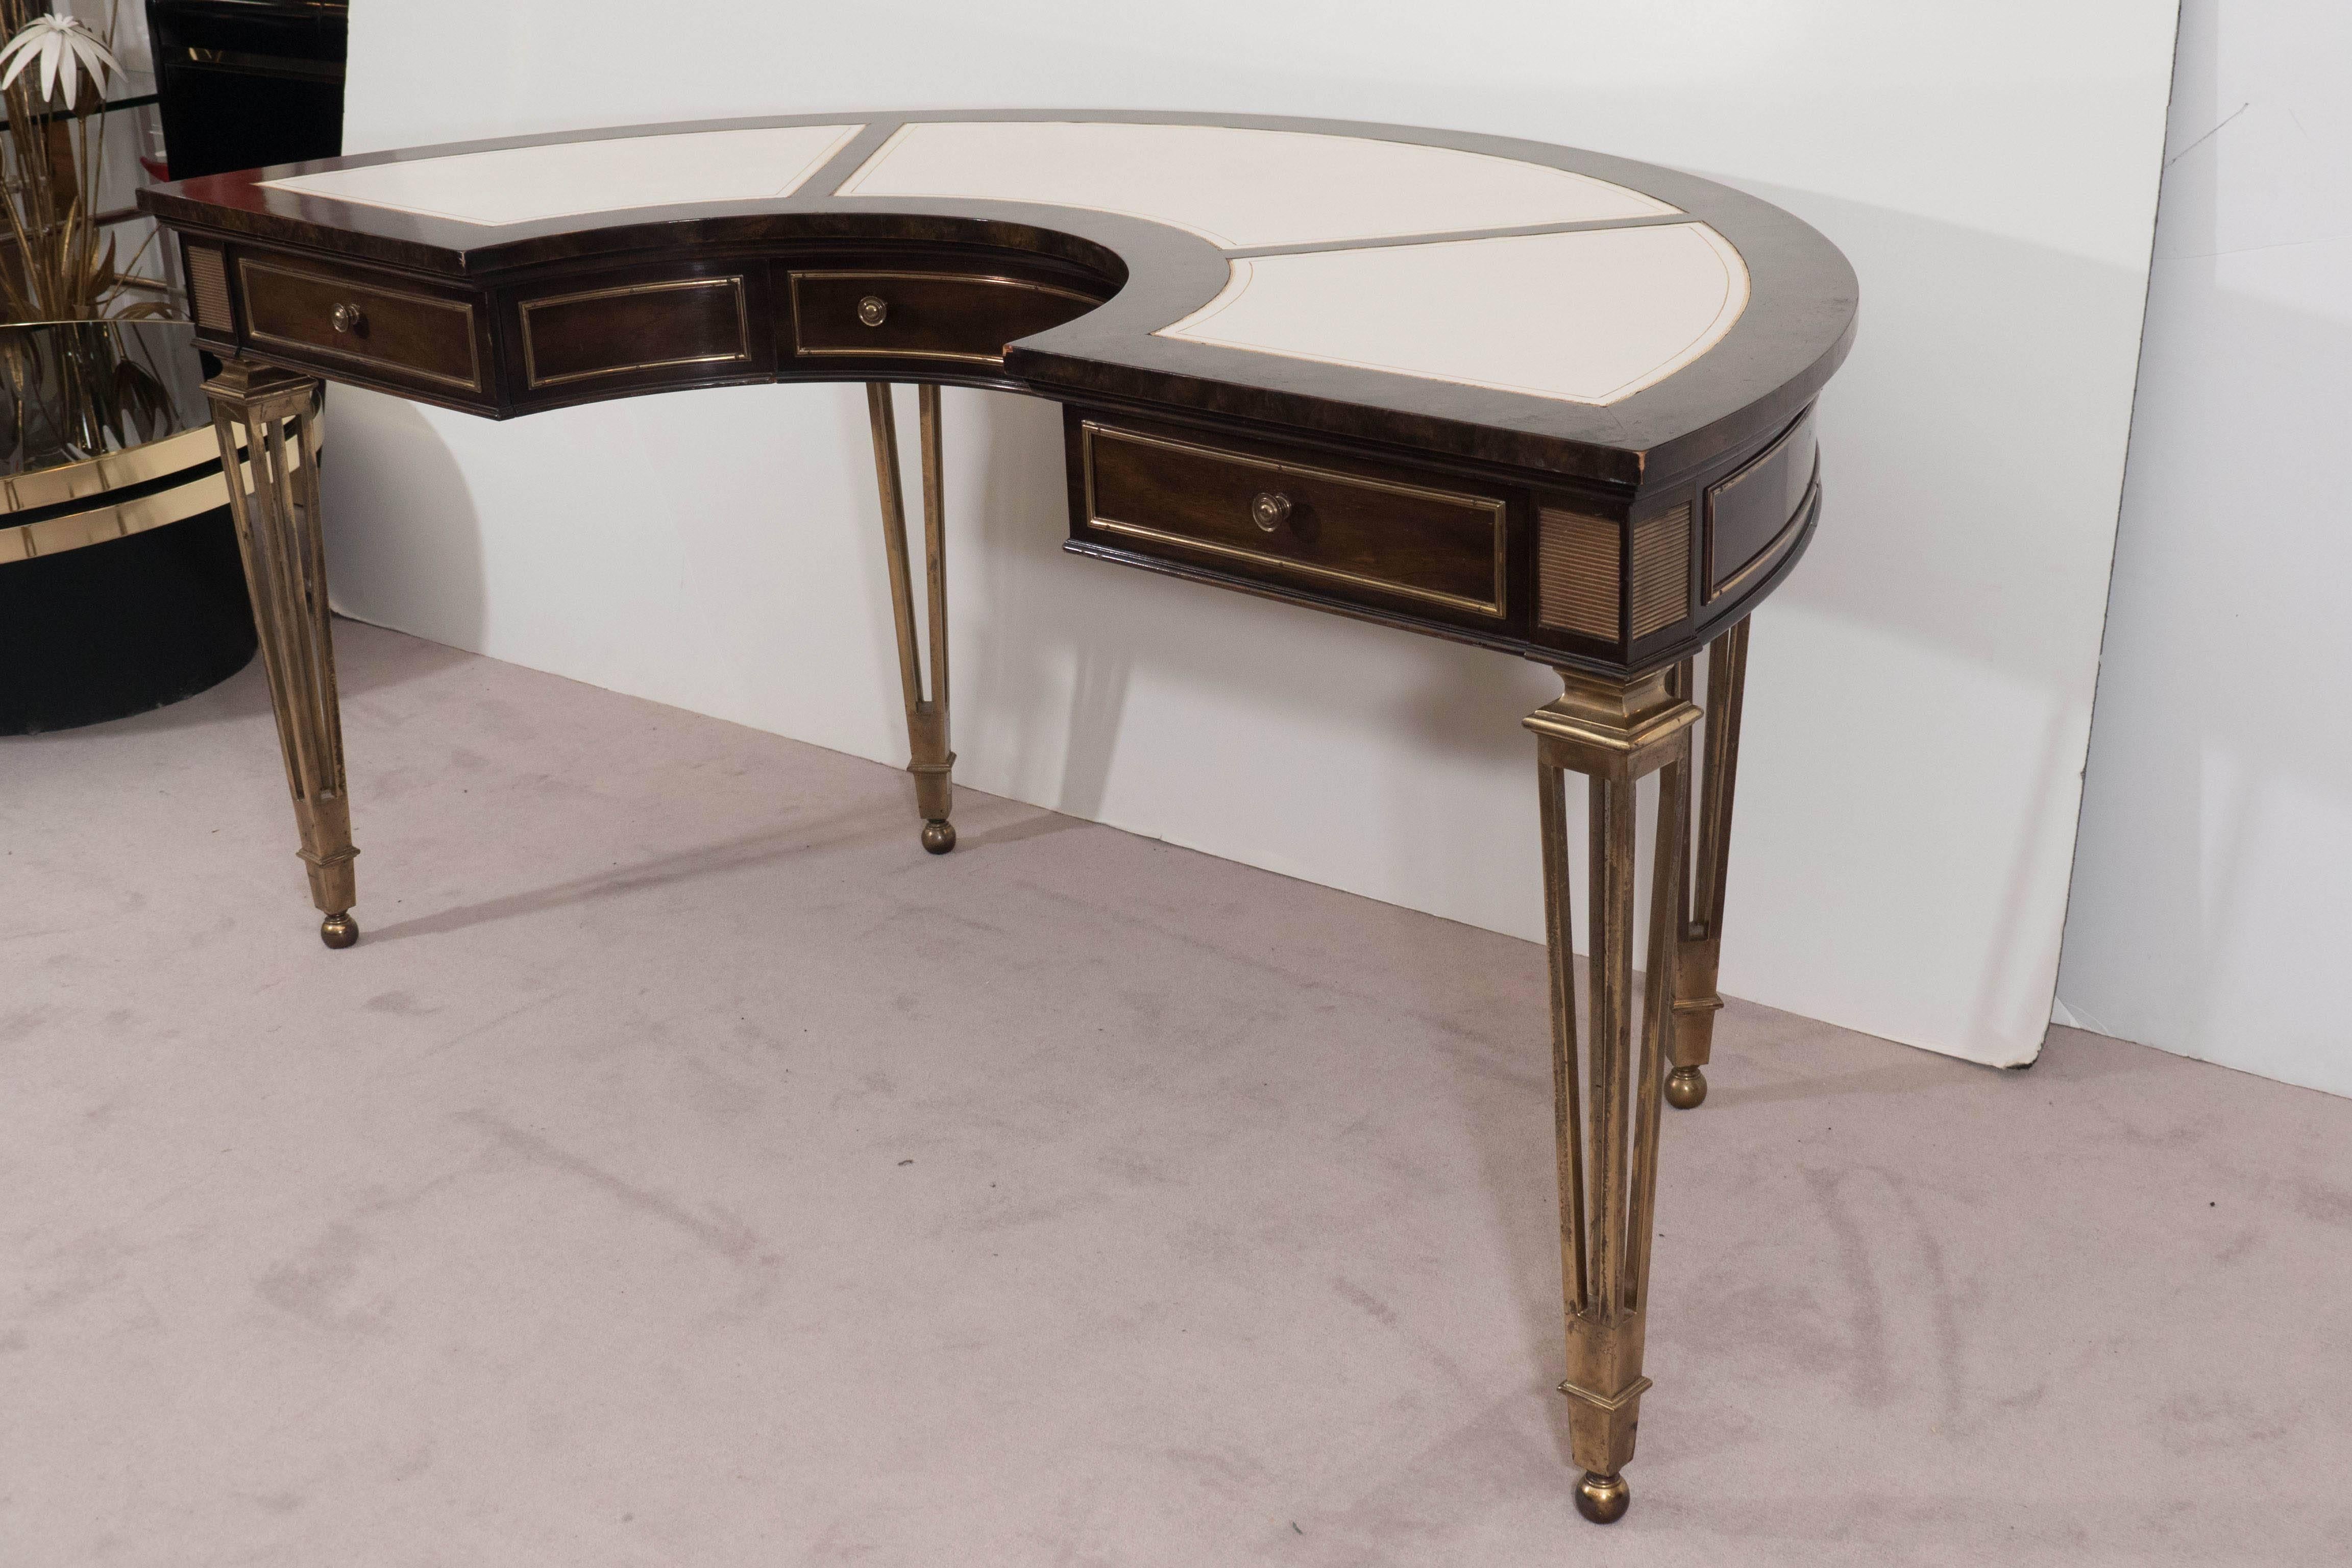 Inlay Mastercraft Burl Wood and Brass Demilune Desk with White Leather Tops